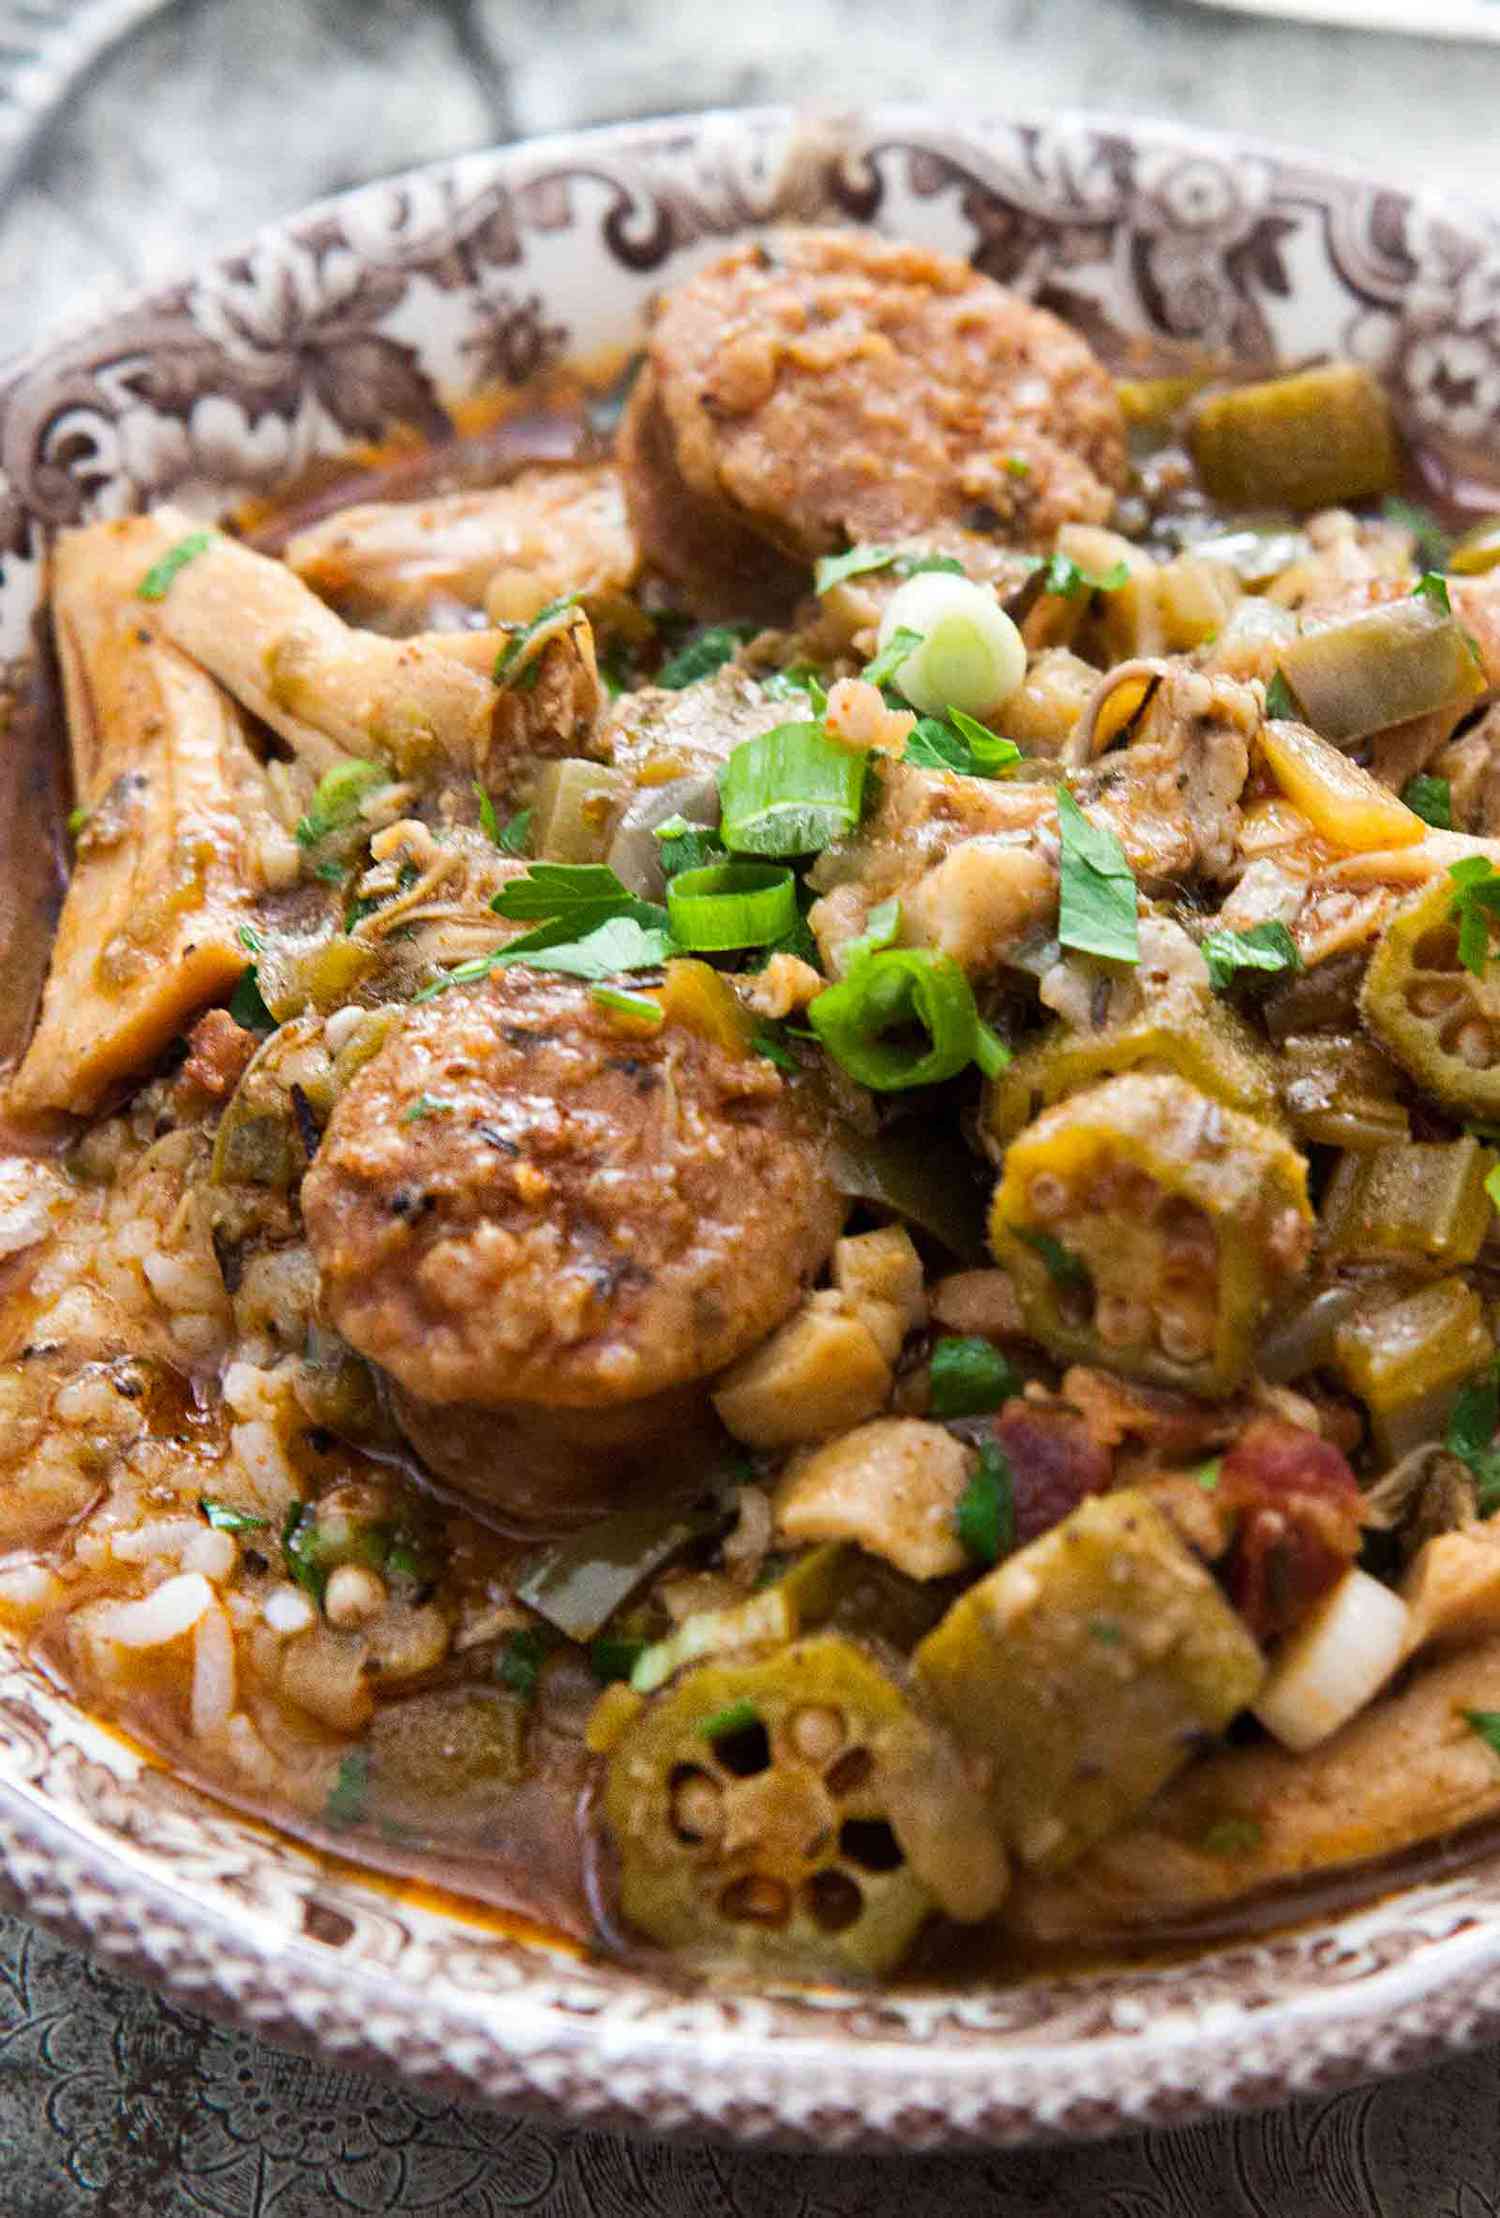 Chicken Gumbo with Sausage